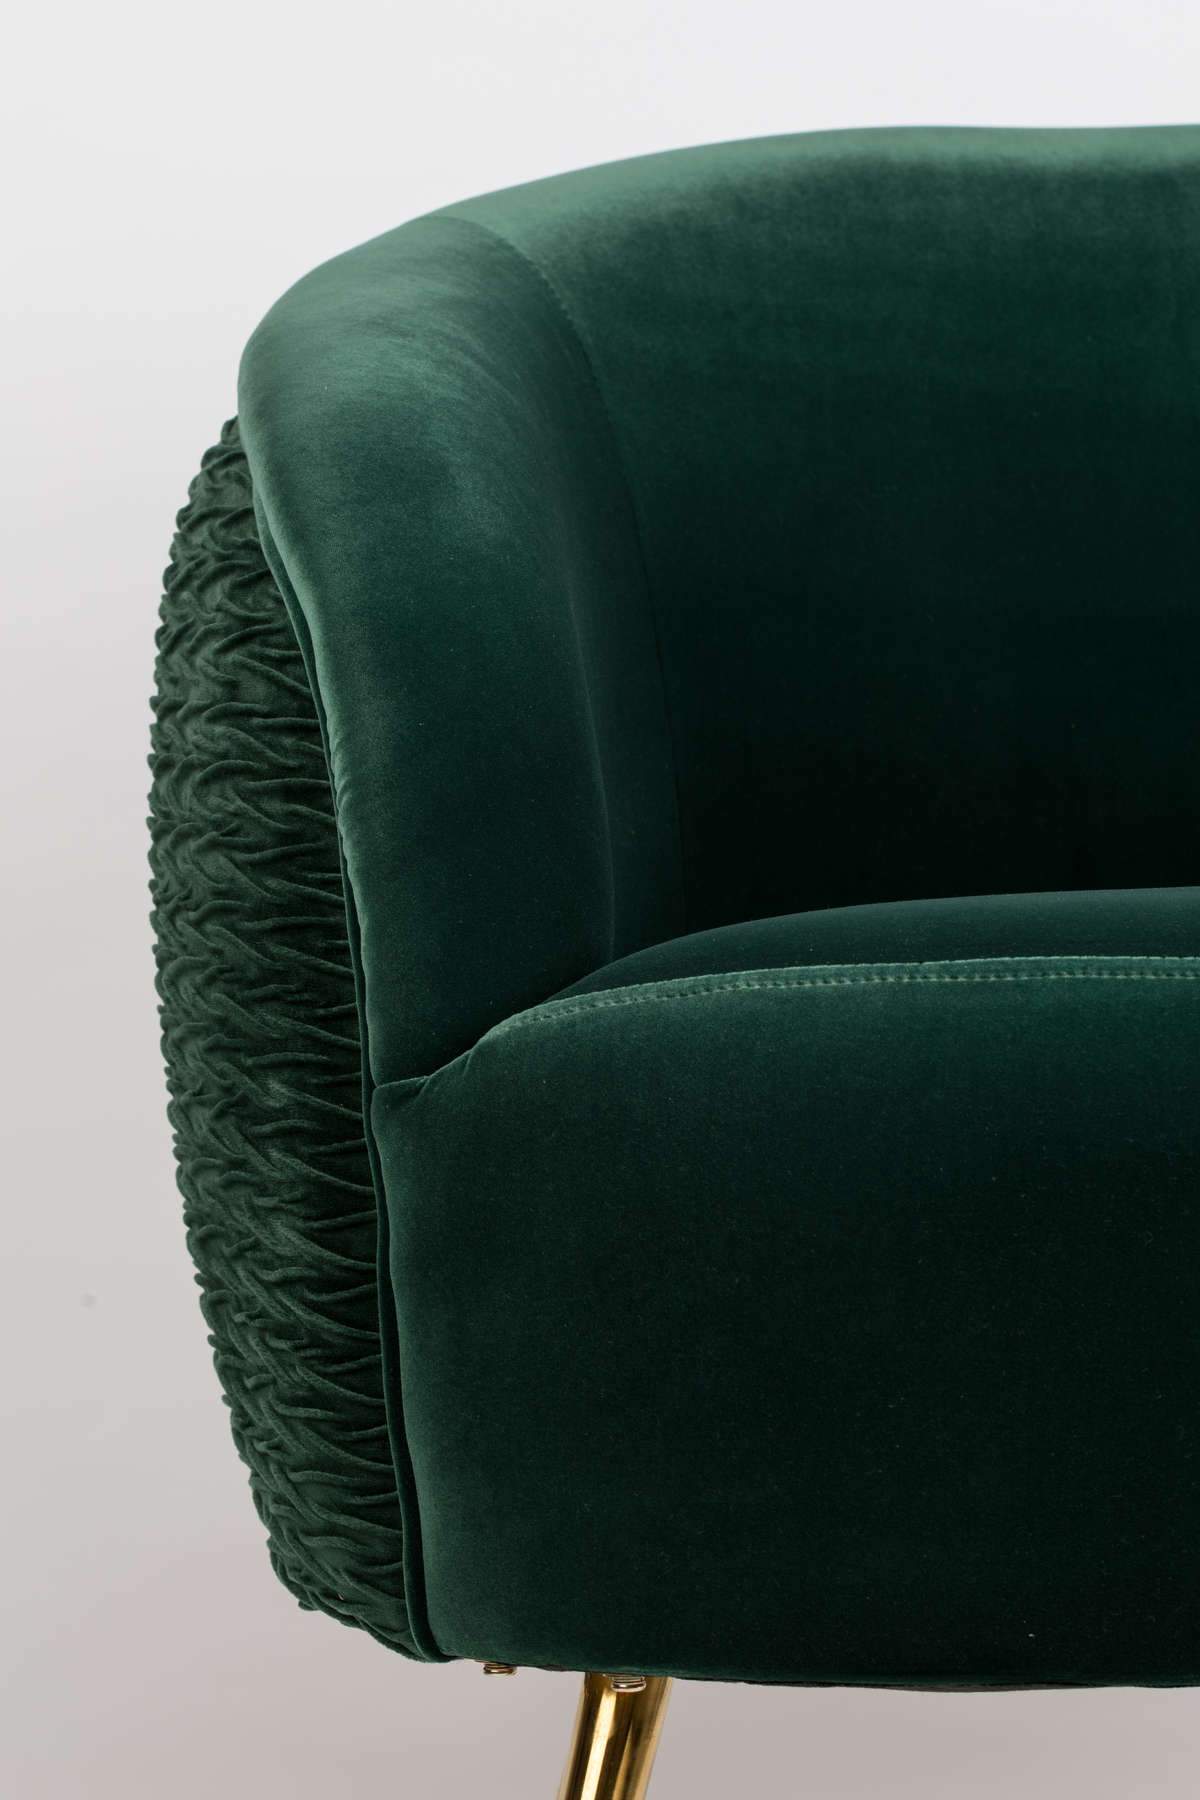 Seating armchair with personality. Rich, velvety upholstery, impeccable rounding and textured backrest: Bold Monkey So Curvy holiday armchair should not sit quietly in the corner. It is an armchair that attracts attention. Thin, slender brass legs balance the excessive shape of the chair, embedding it in tasteful design. Alone or as a pair, the Bold Monkey So Curvy armchair is a visual reference point for each living room space.